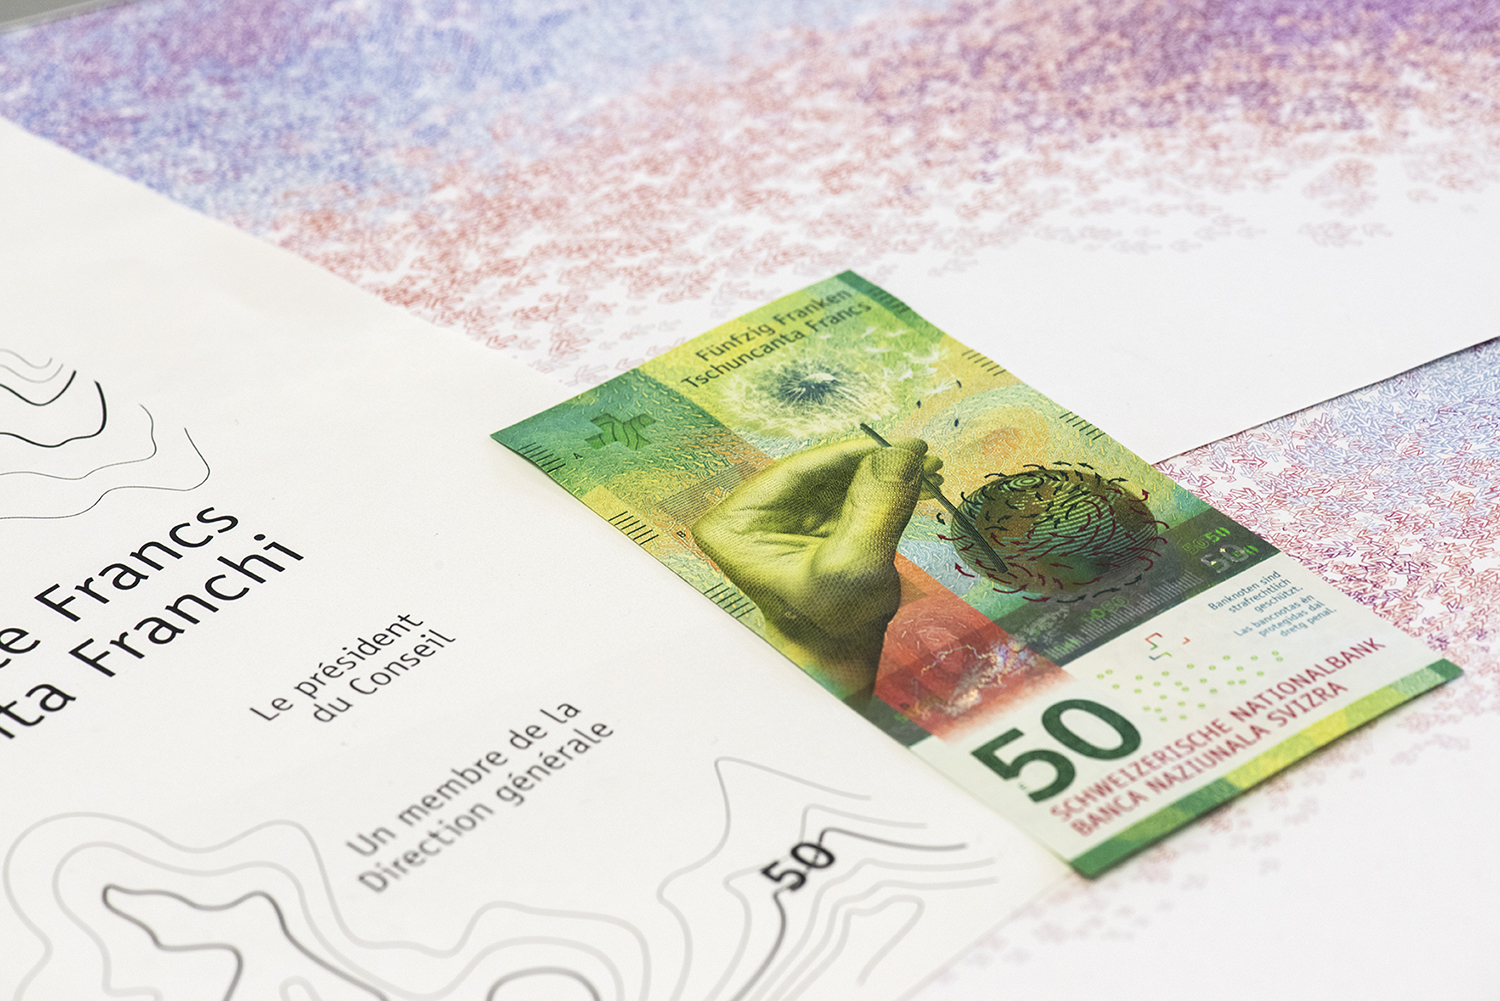 The 50-franc note